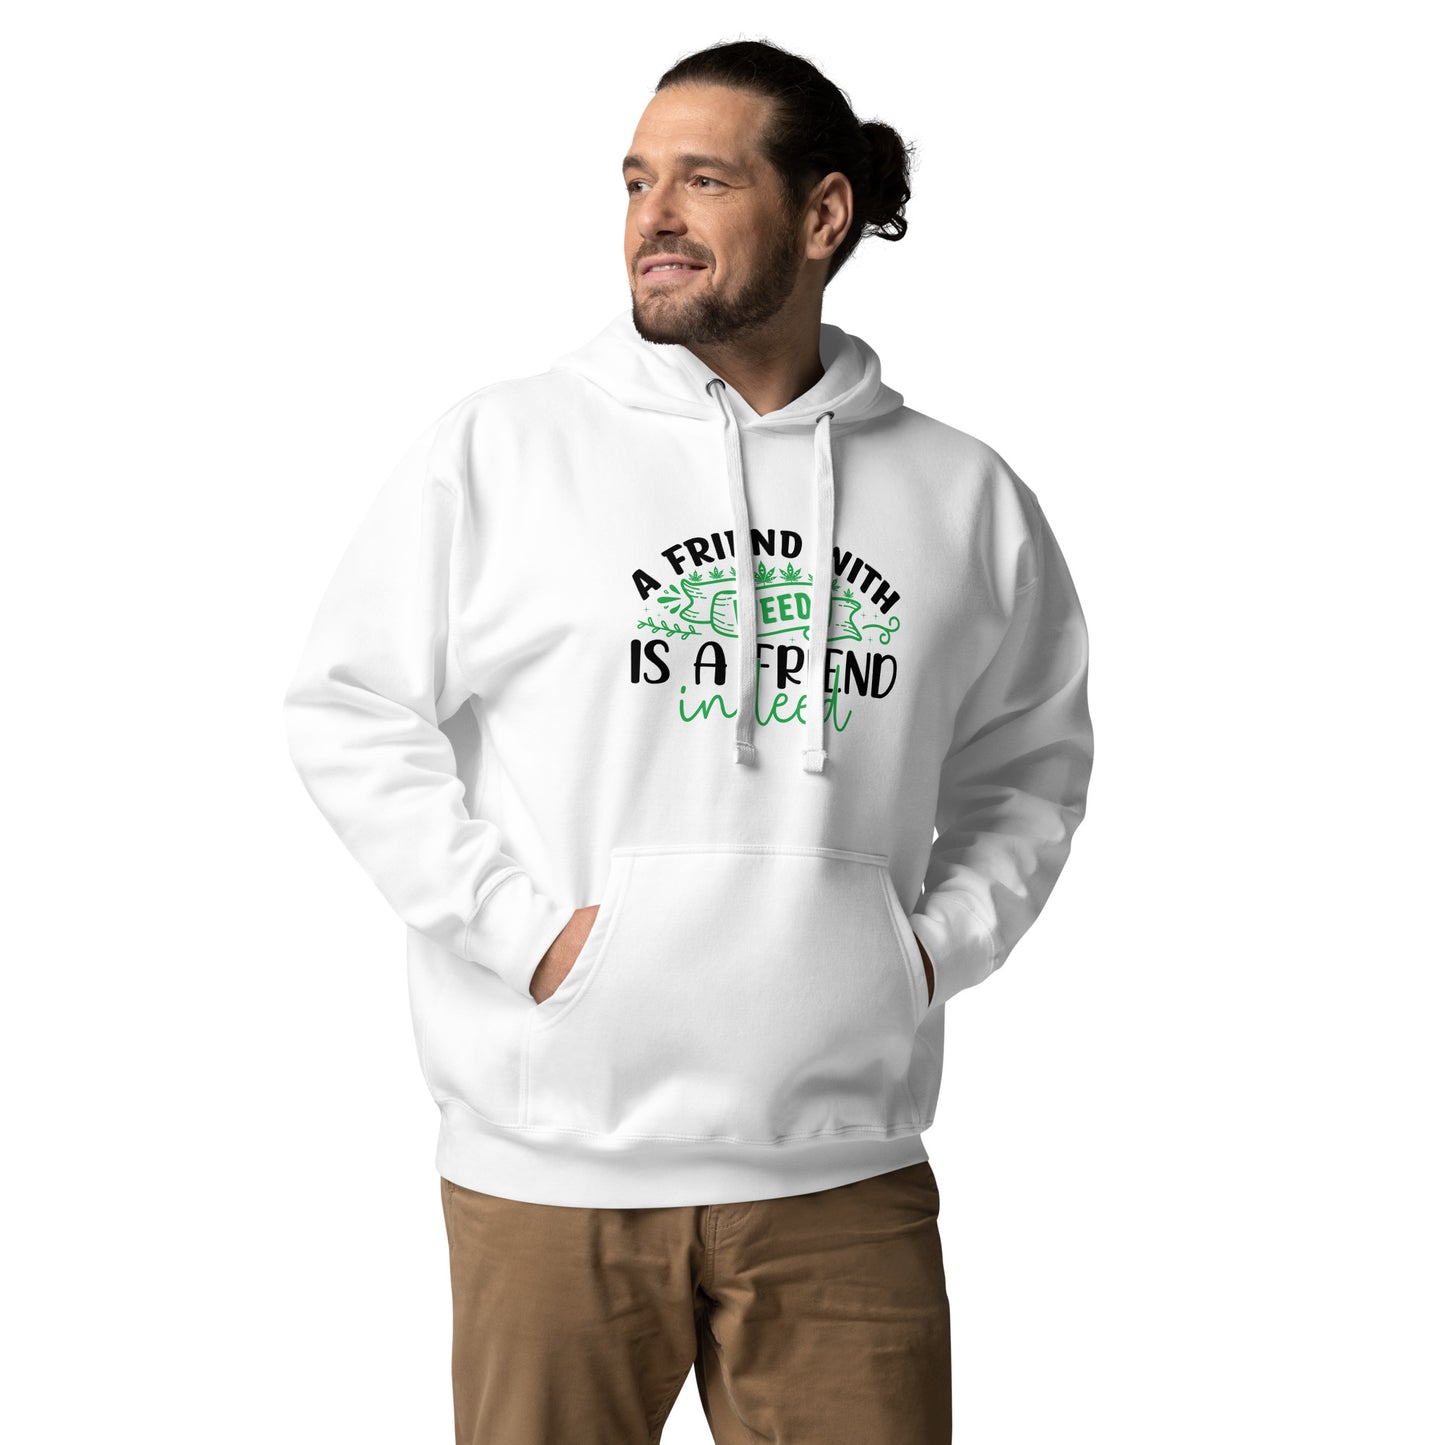 Image of a model wearing our Friendship-Embracing Hoodie: A Friend with Deed is a Friend Indeed Edition, symbolizing the importance of meaningful connections.